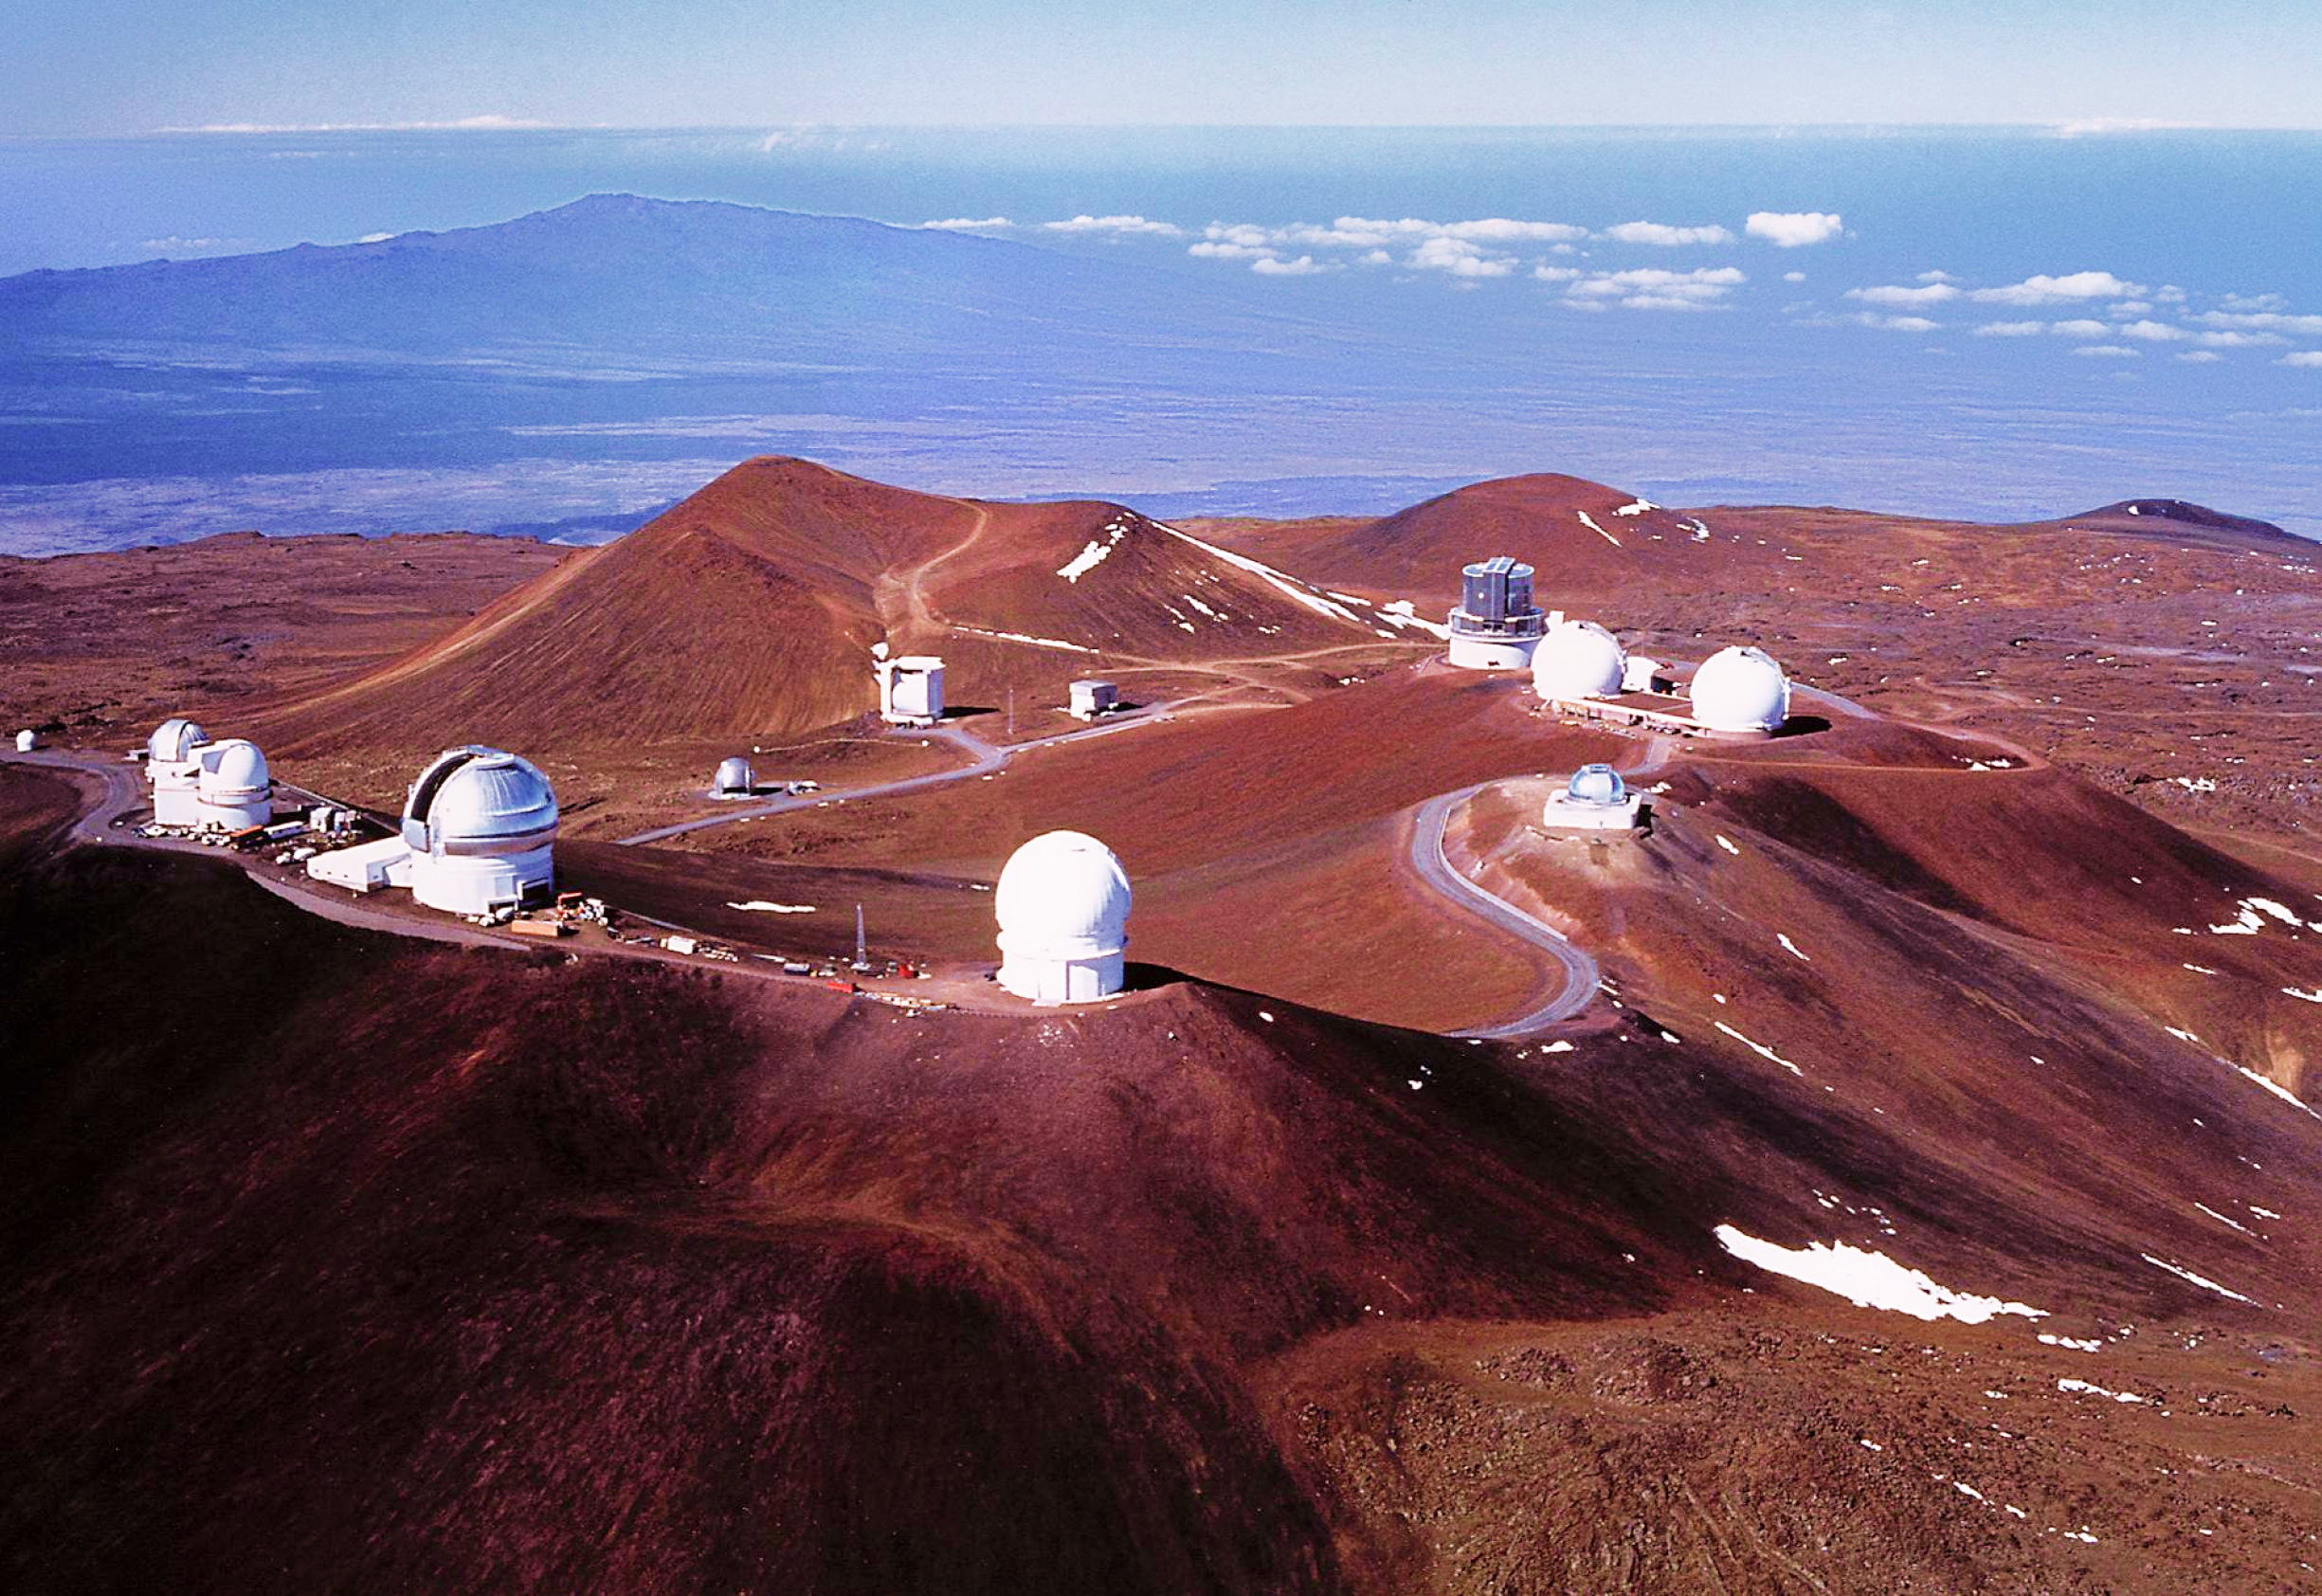 The top of Mauna Kea, showing many of its fancy satellite dishes.